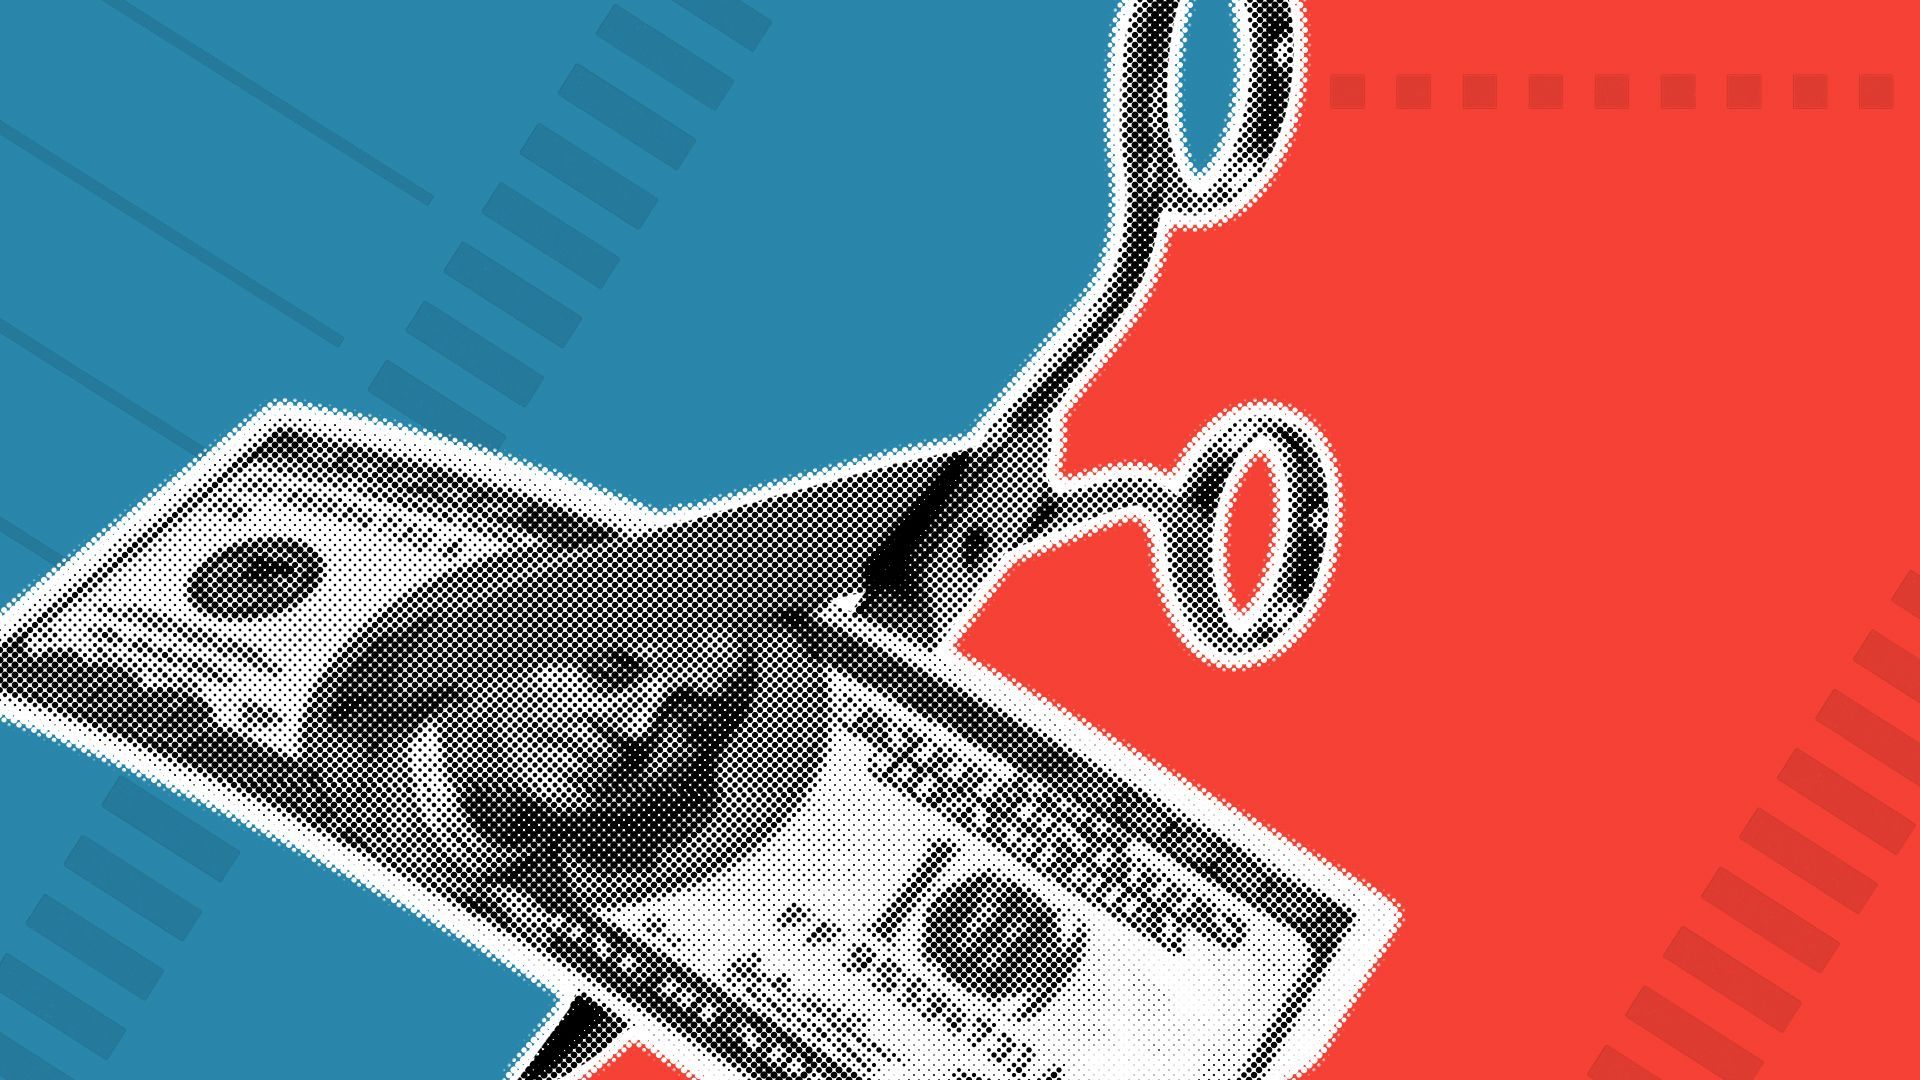 Illustration of a pair of scissors cutting a one hundred dollar bill